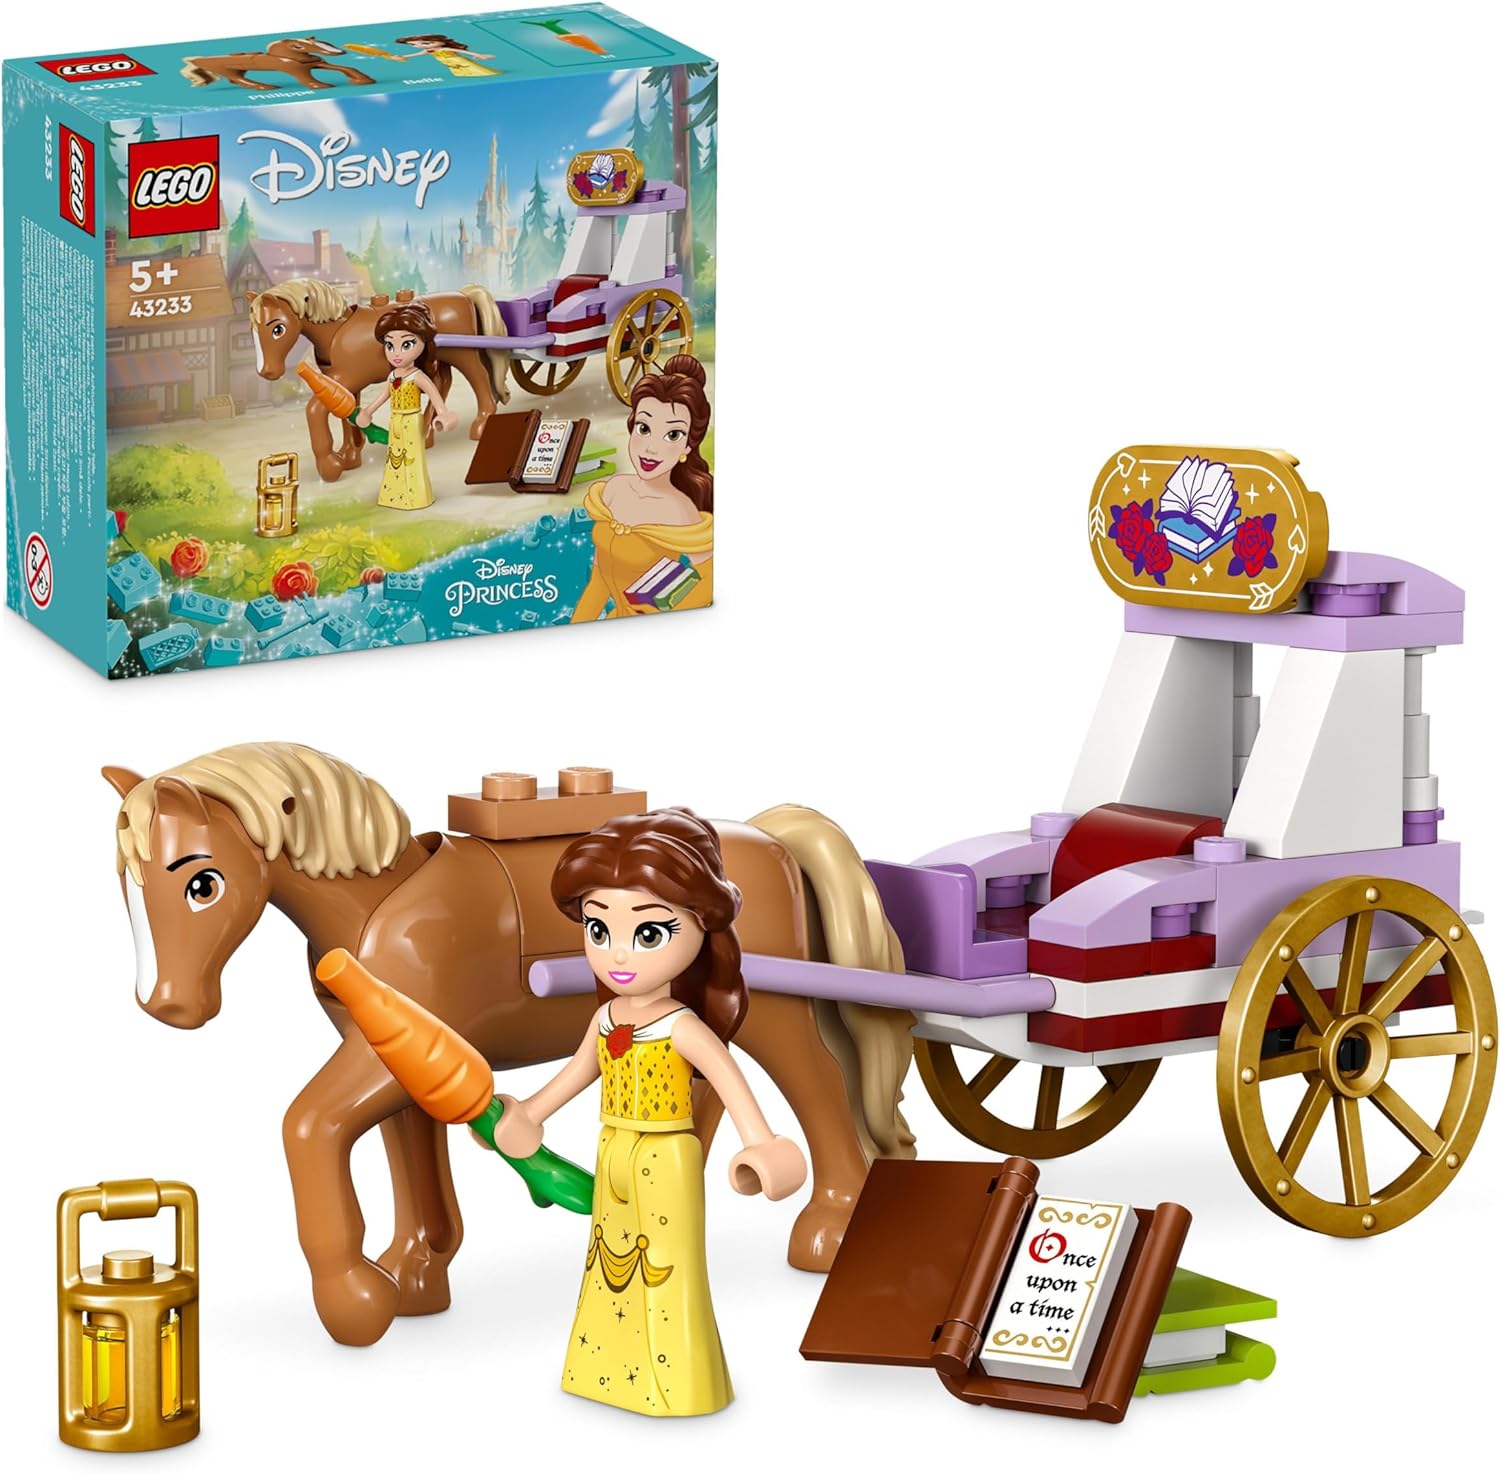 LEGO Disney Princess Belles Horse Carriage, Princess Set with Horse Toy and Doll, Carriage with Horse Figure for Disney Movie Beauty and the Beast, Gift for Girls and Boys 43233